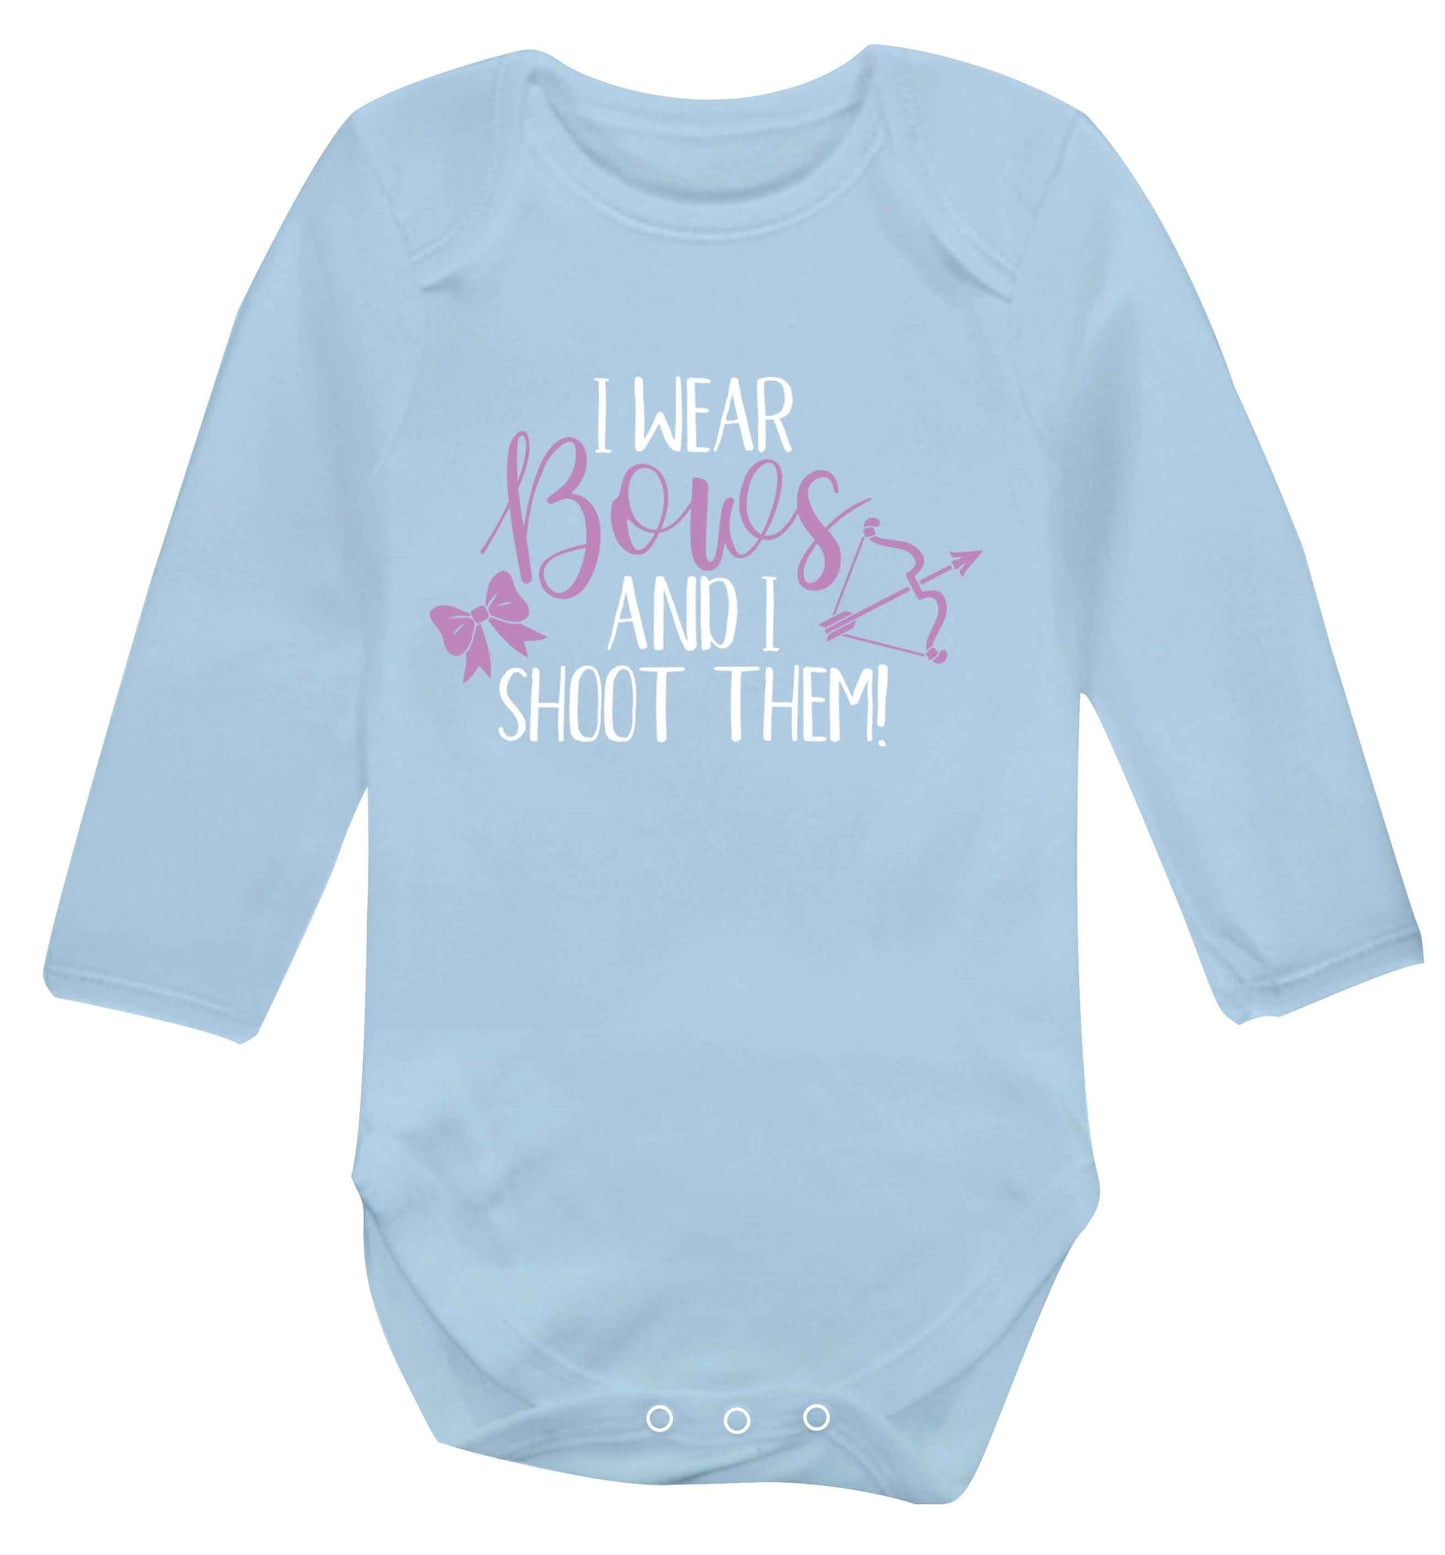 I wear bows and I shoot them Baby Vest long sleeved pale blue 6-12 months